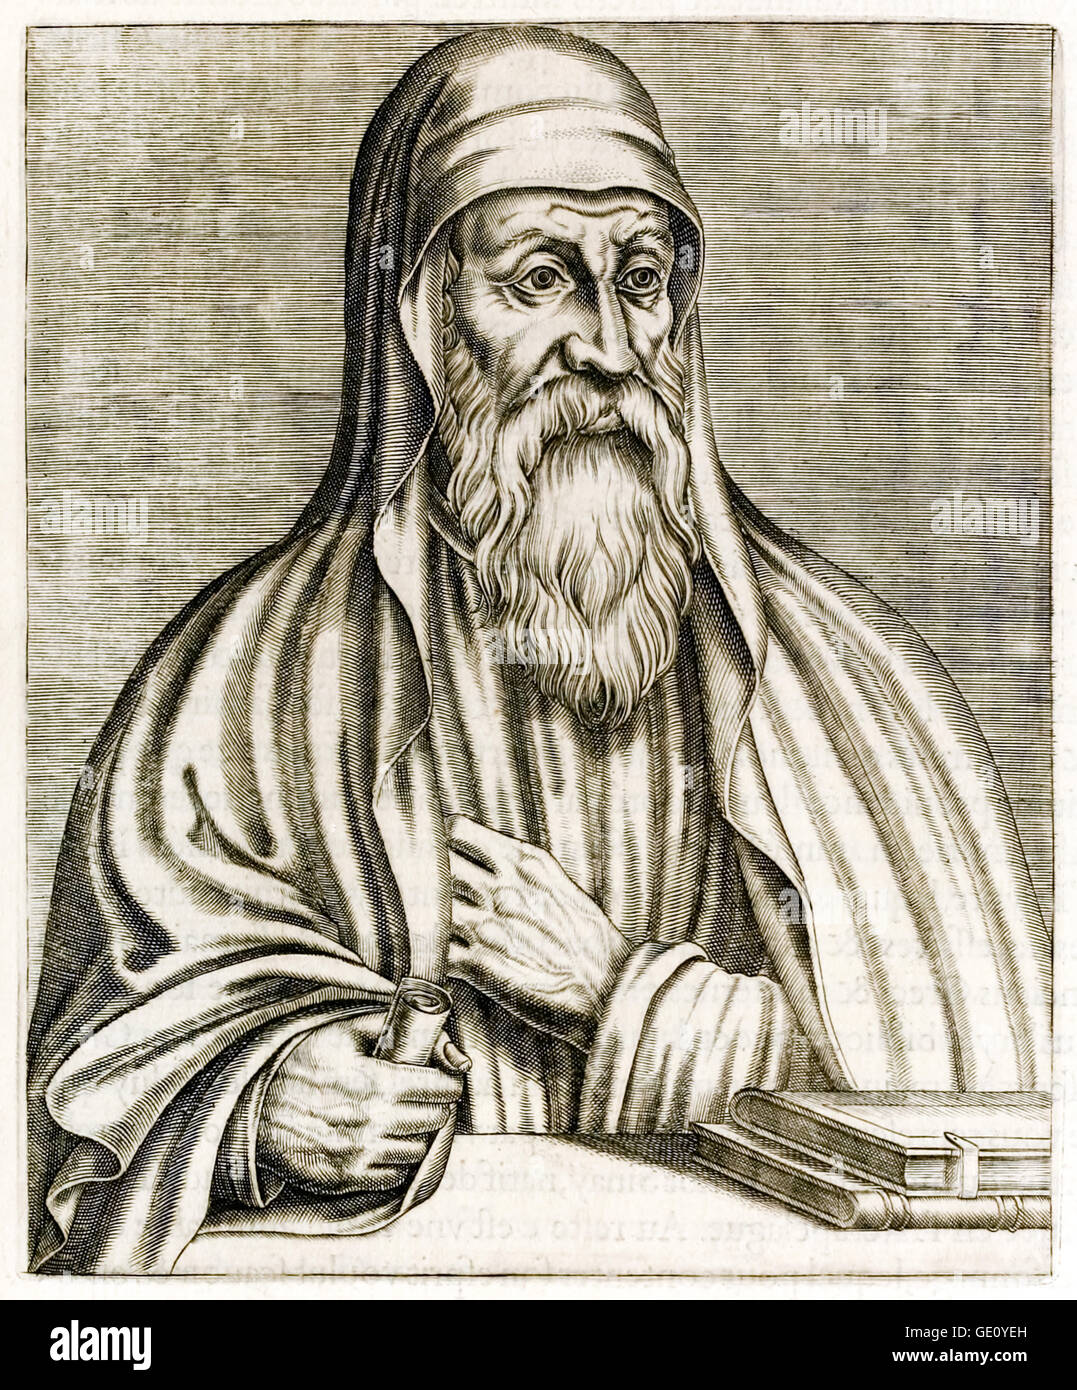 Origen Adamantius (184-254) Greek scholar and theologian born in Alexandria, Egypt who’s works included ‘Hexapla’, a study of different translations of the Old Testament. Engraving by  Frère André Thévet (1516-1590). See description for more information. Stock Photo